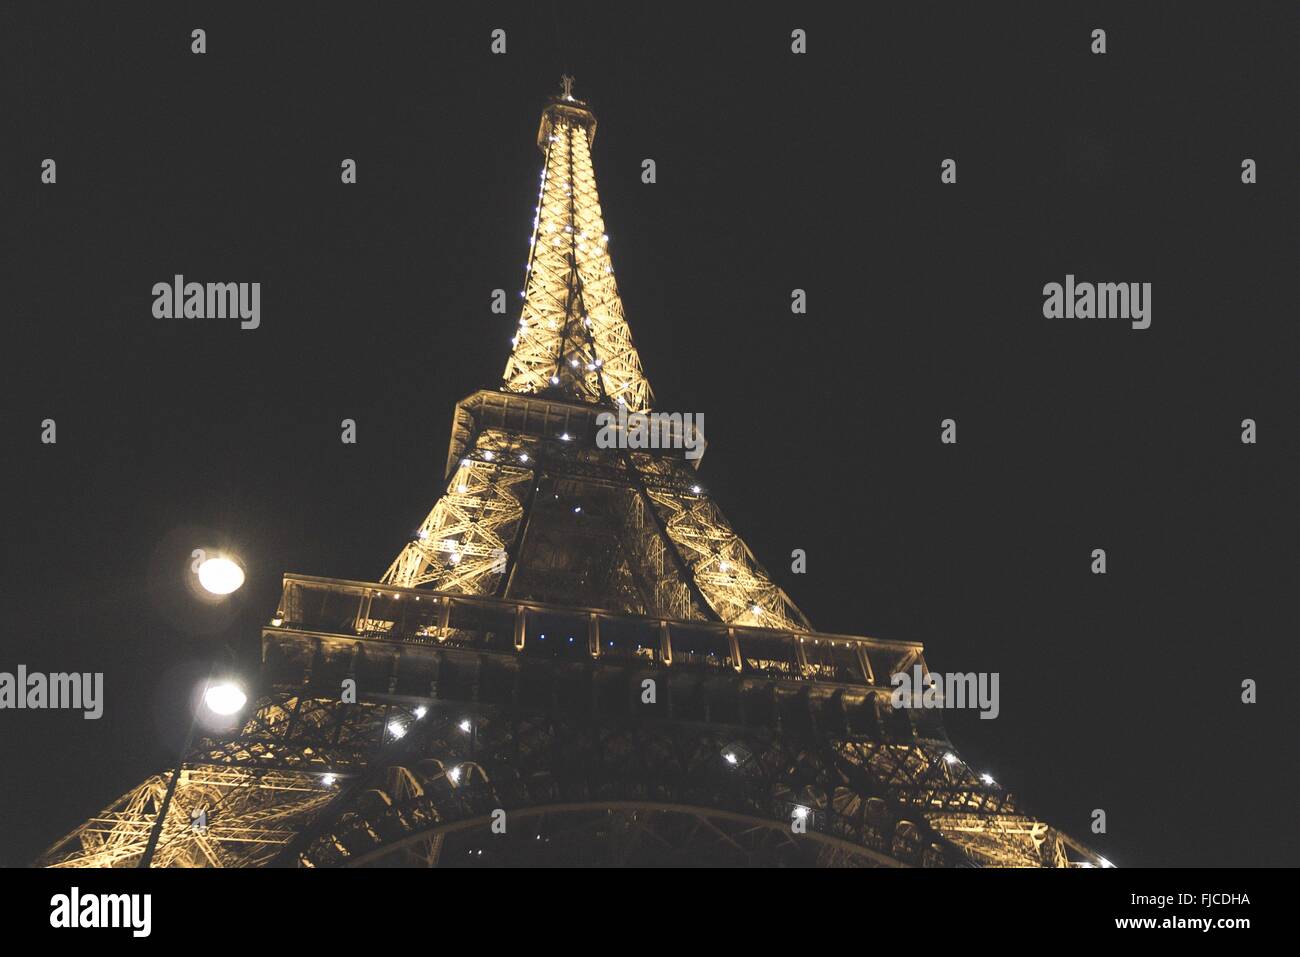 Paris, France - circa September 2012: A night photograph of the Tour Eiffel taking underneath the structure looking up, photos h Stock Photo